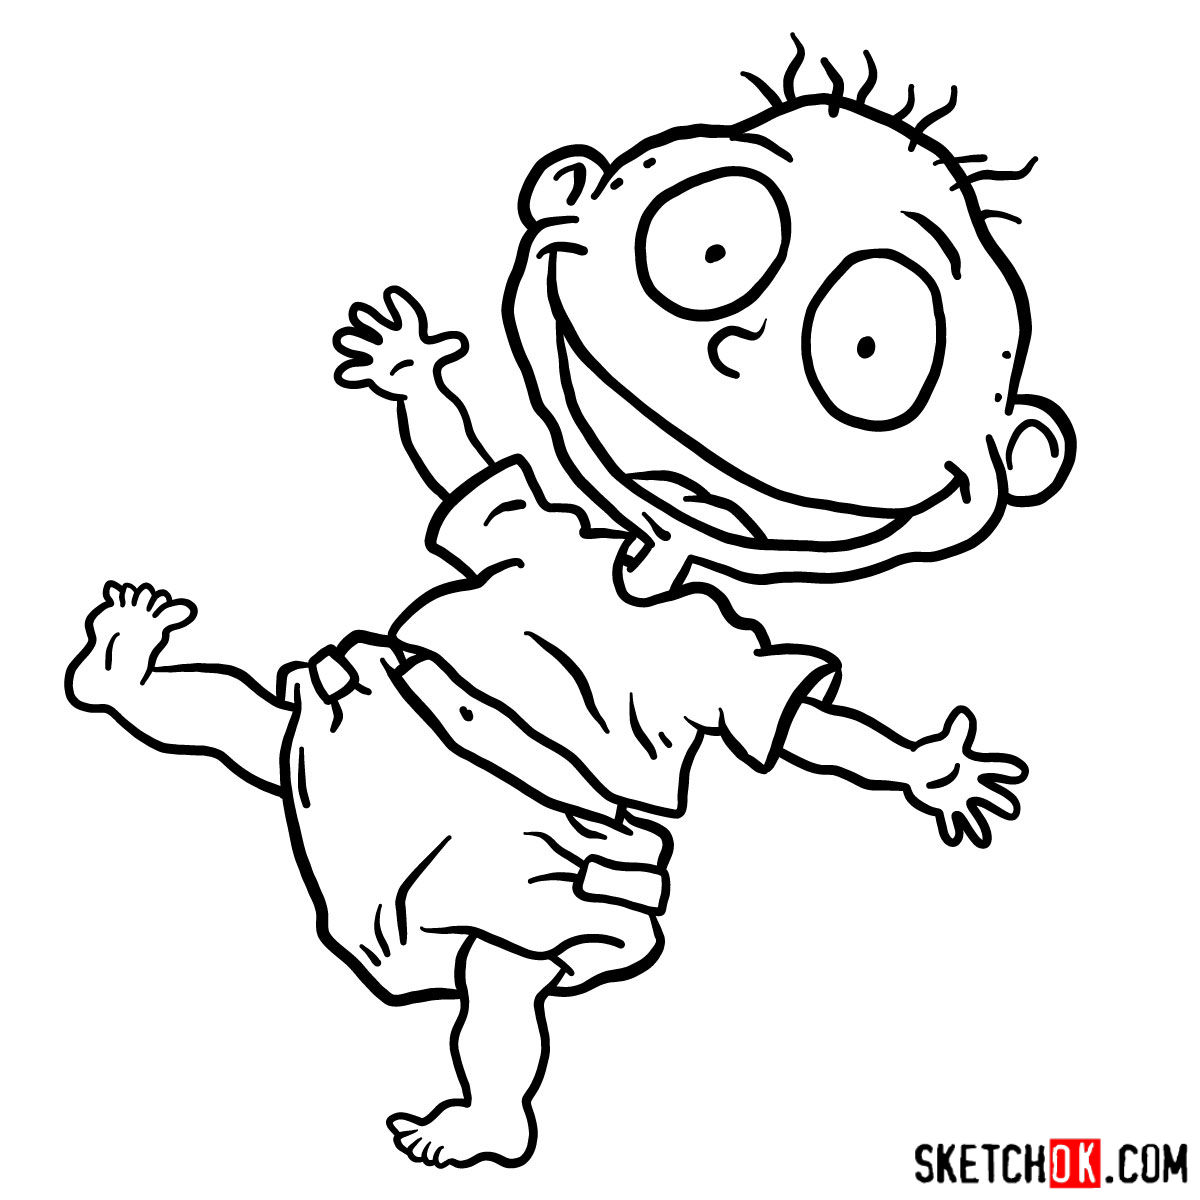 How to draw Tommy Pickles - Step by step drawing tutorials